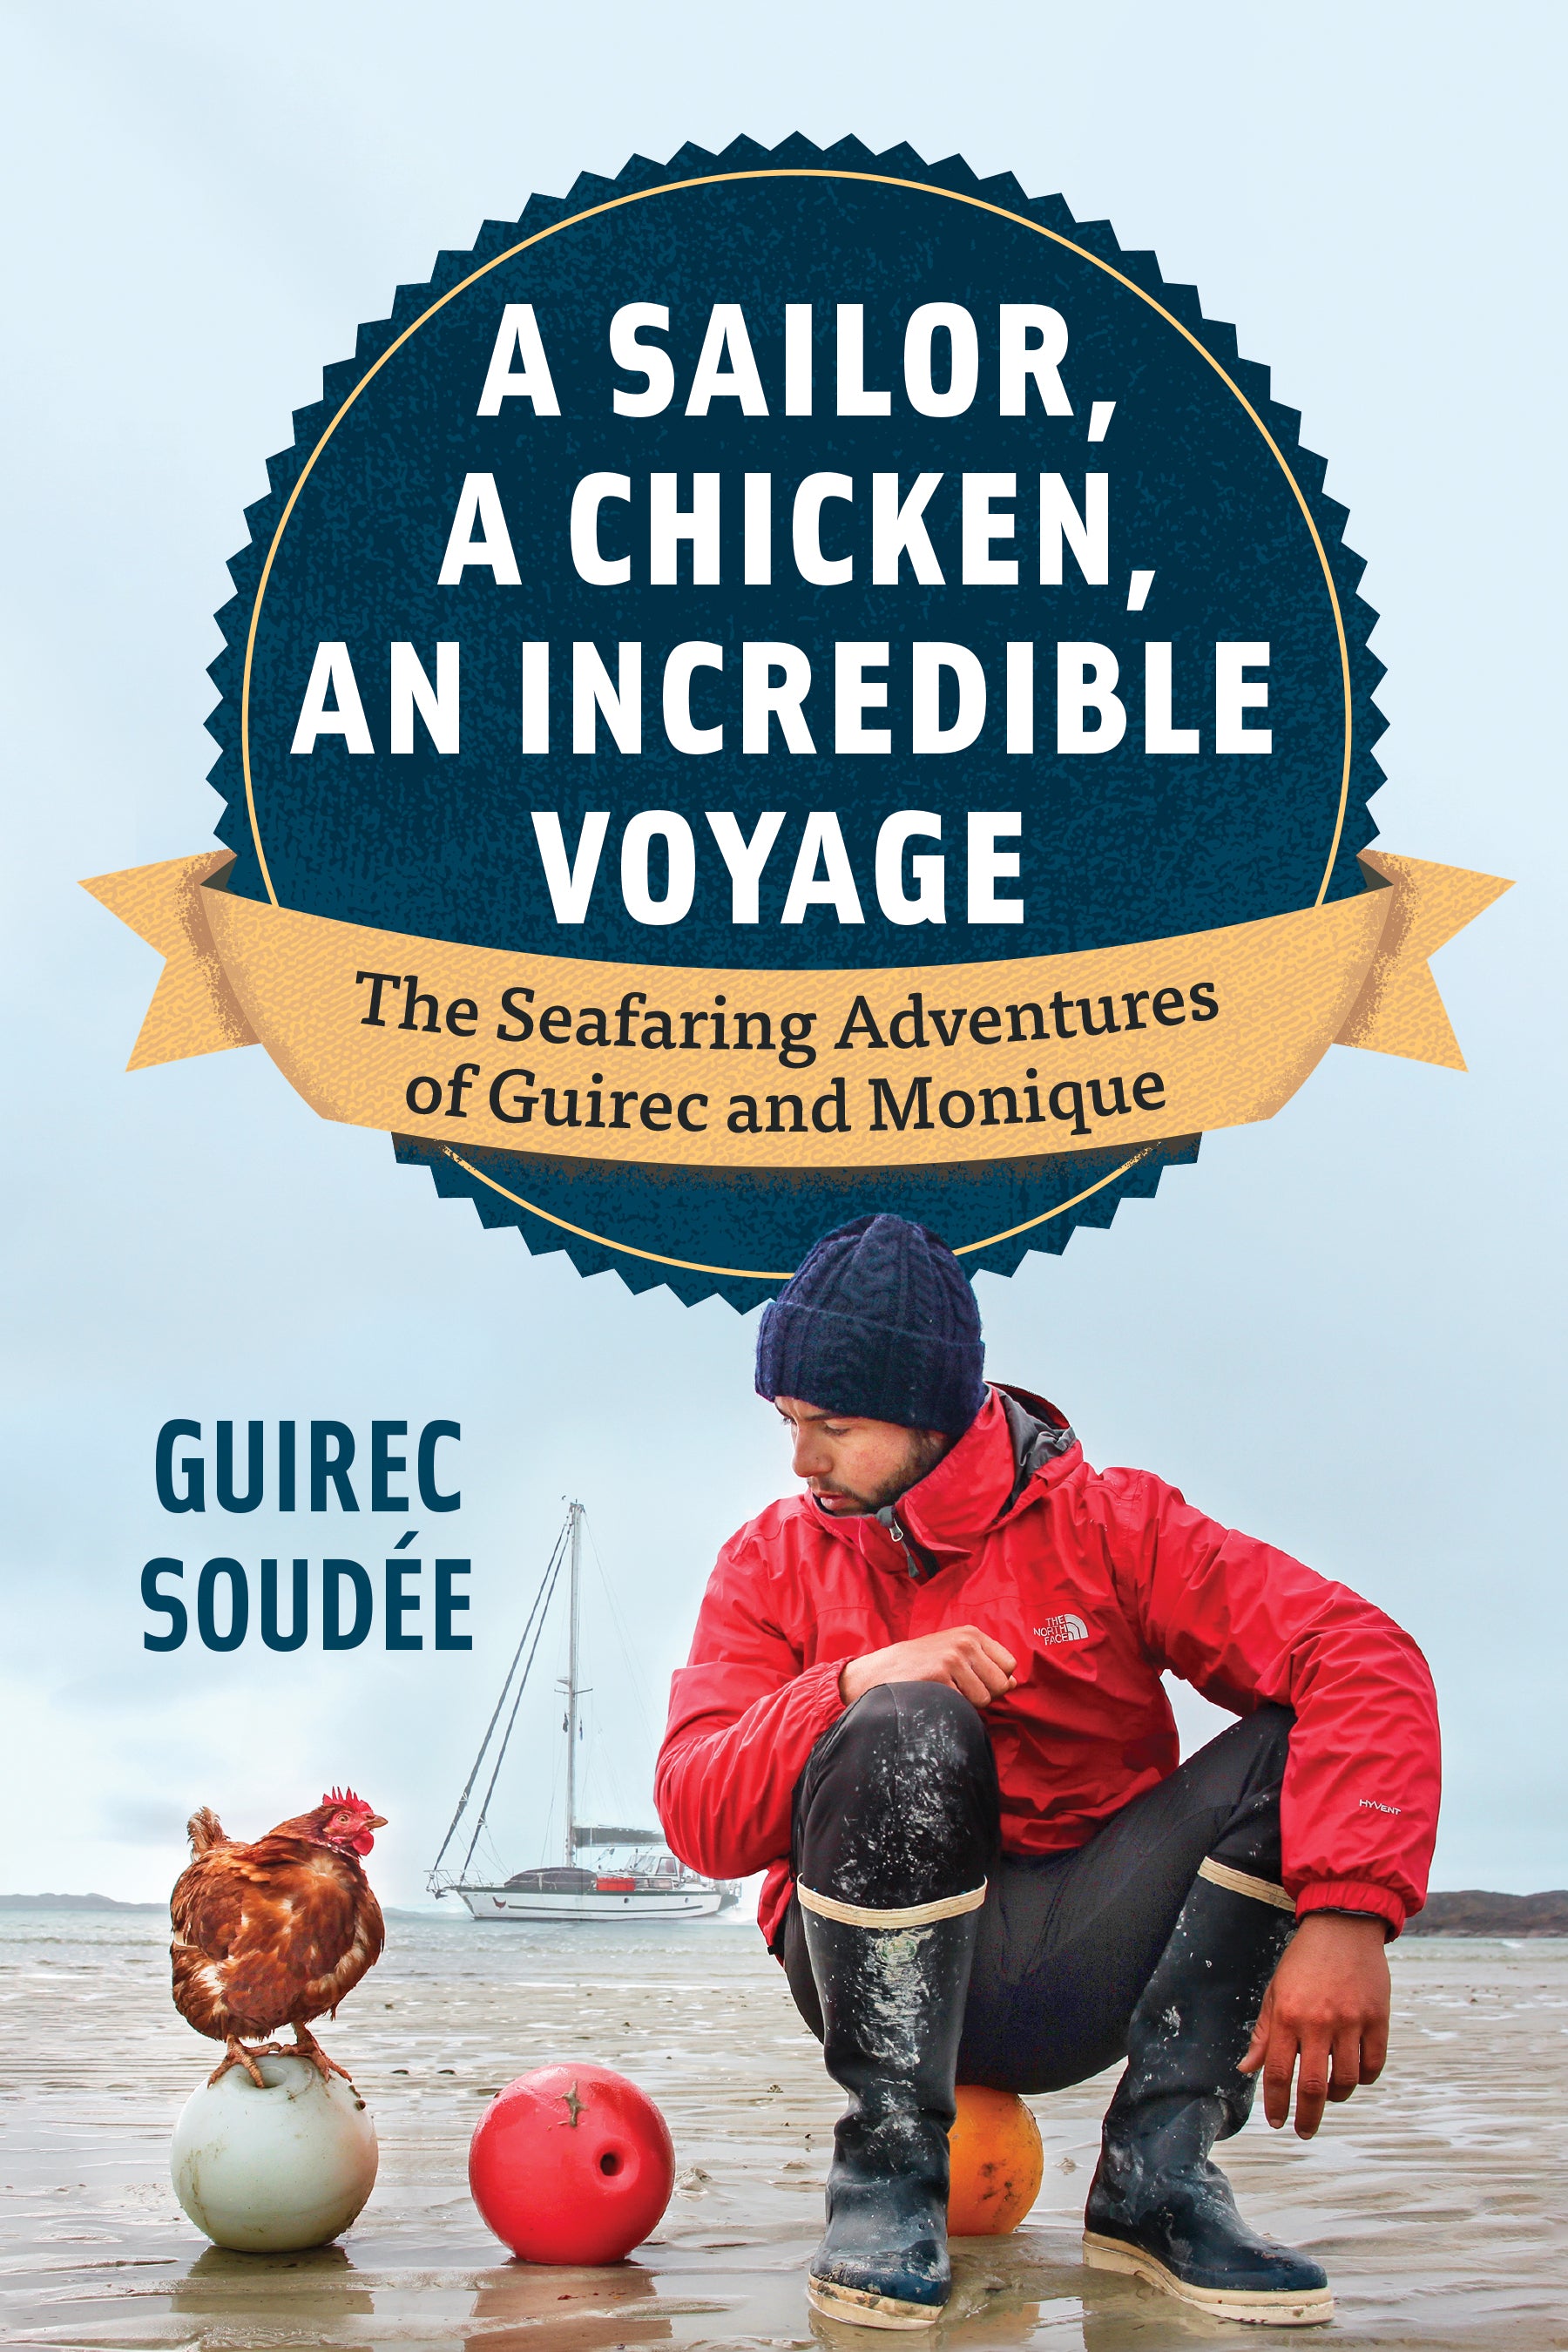 A Sailor, a Chicken, an Incredible Voyage by Guirec SoudÃ©e and David Warriner